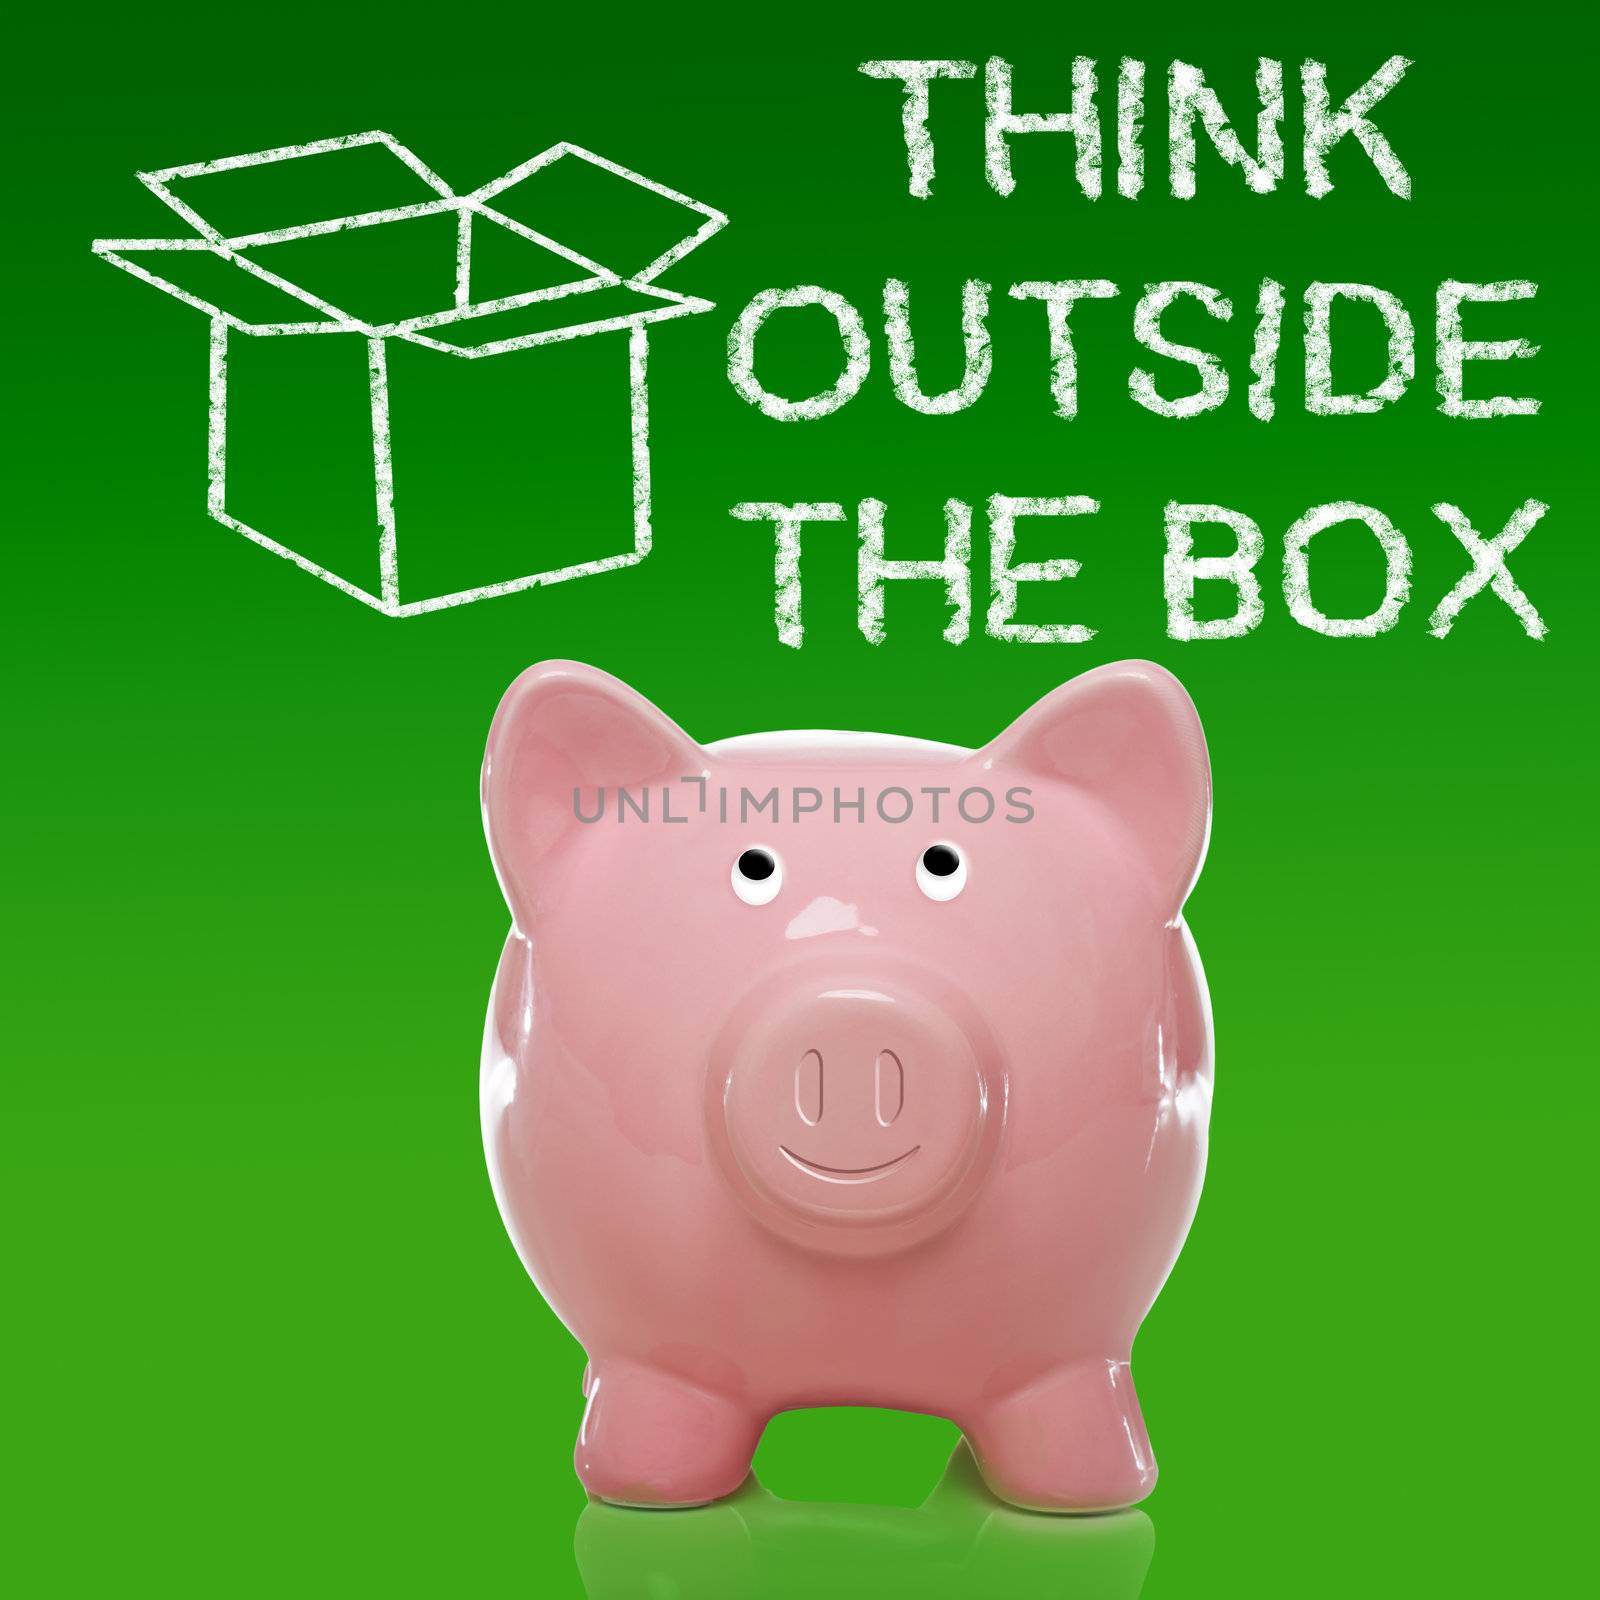 Smiling Piggy bank with thinking outside the box on green background